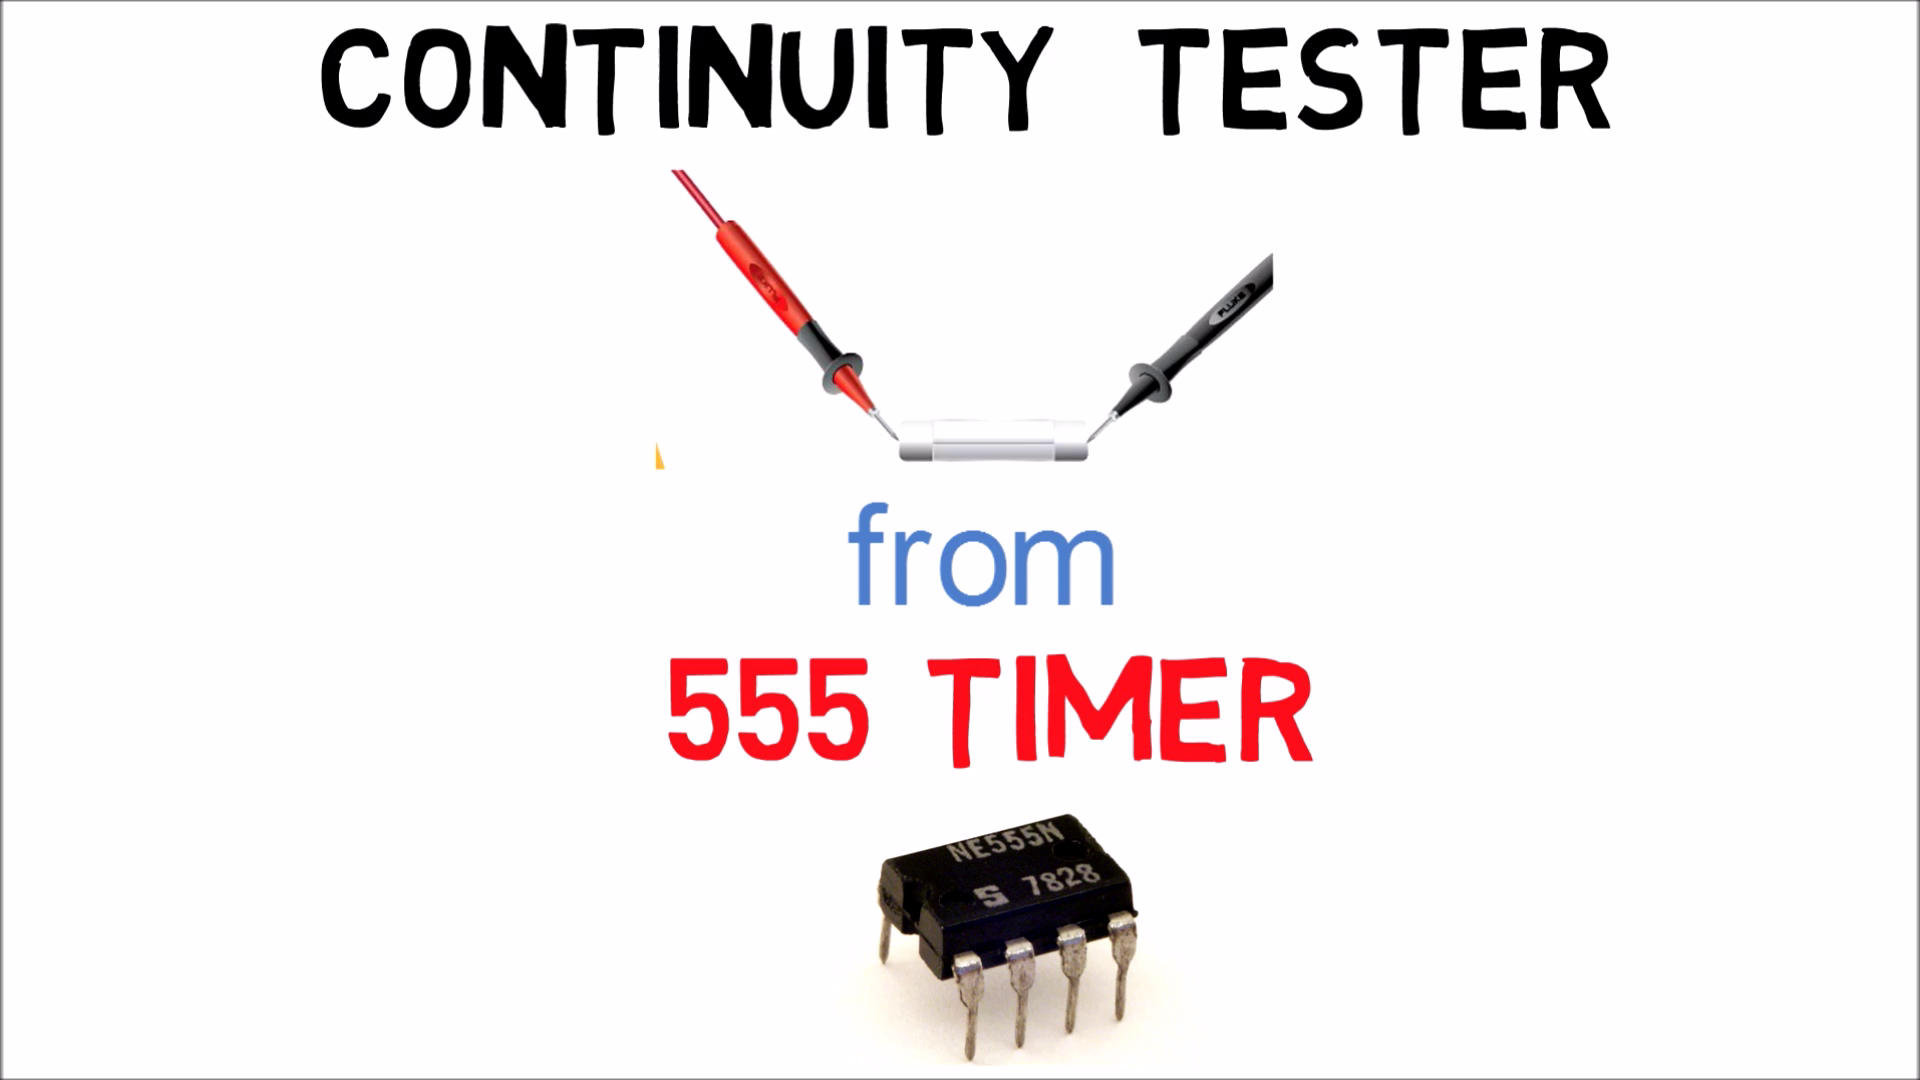 Continuity tester